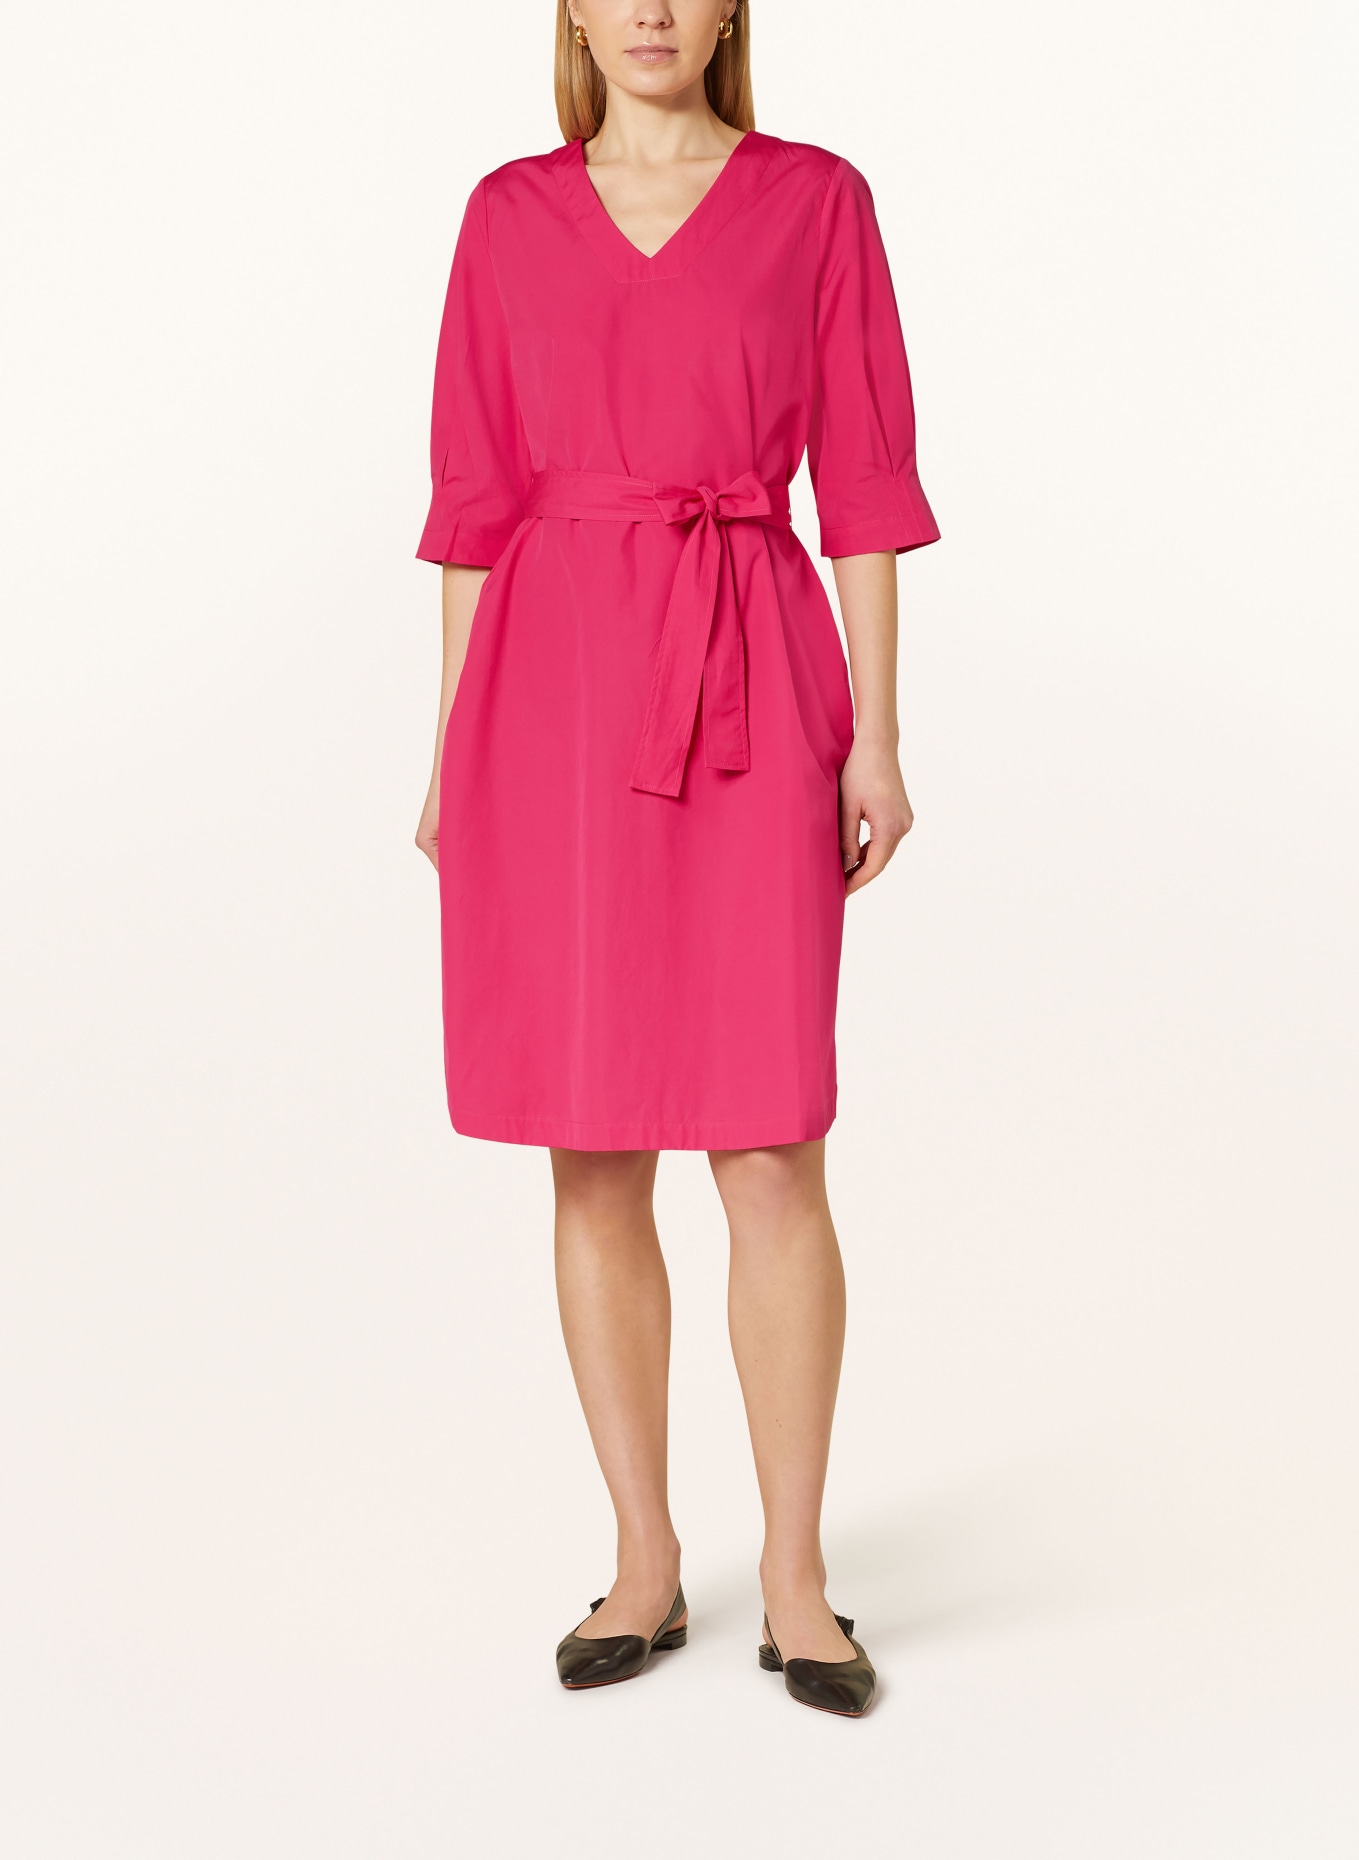 MAERZ MUENCHEN Dress with 3/4 sleeves, Color: PINK (Image 2)